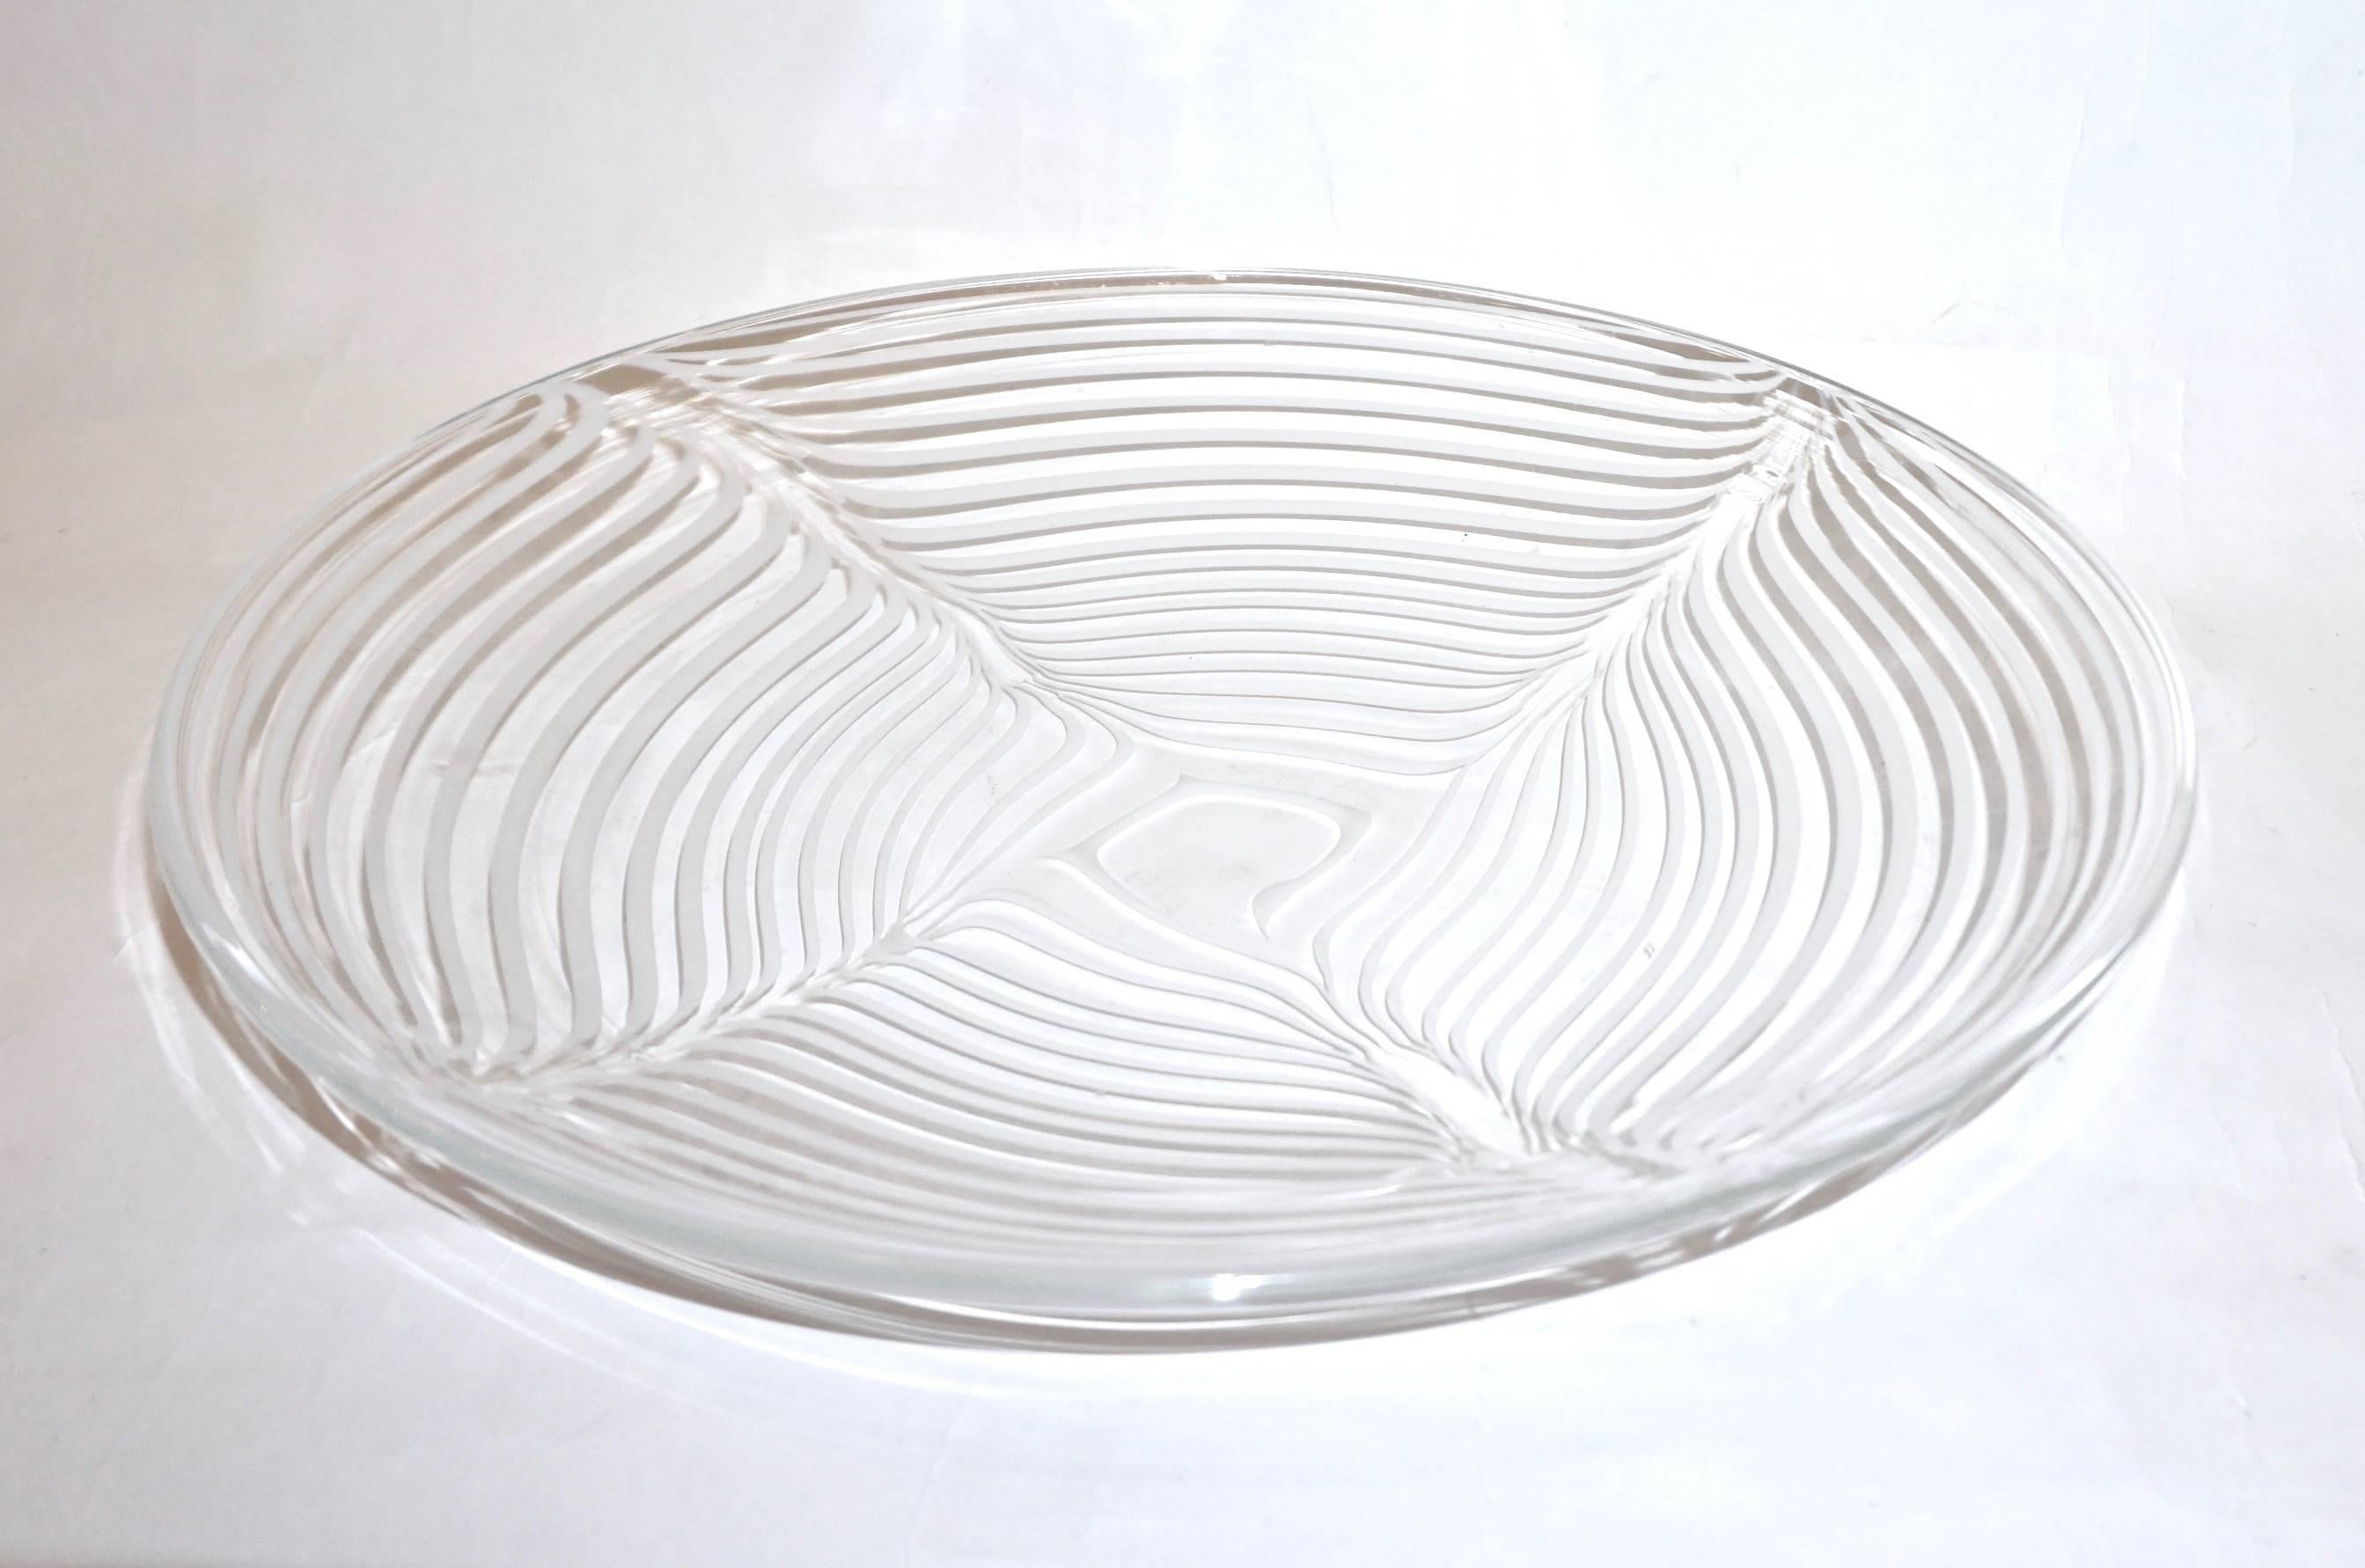 1970s elegant and refined Minimalist creation signed Formia Murano, crystal clear blown Murano glass dish or centerpiece decorated with swags of white mezza filigrana that creates a very interesting design and gives uniqueness to the shape.
Can be